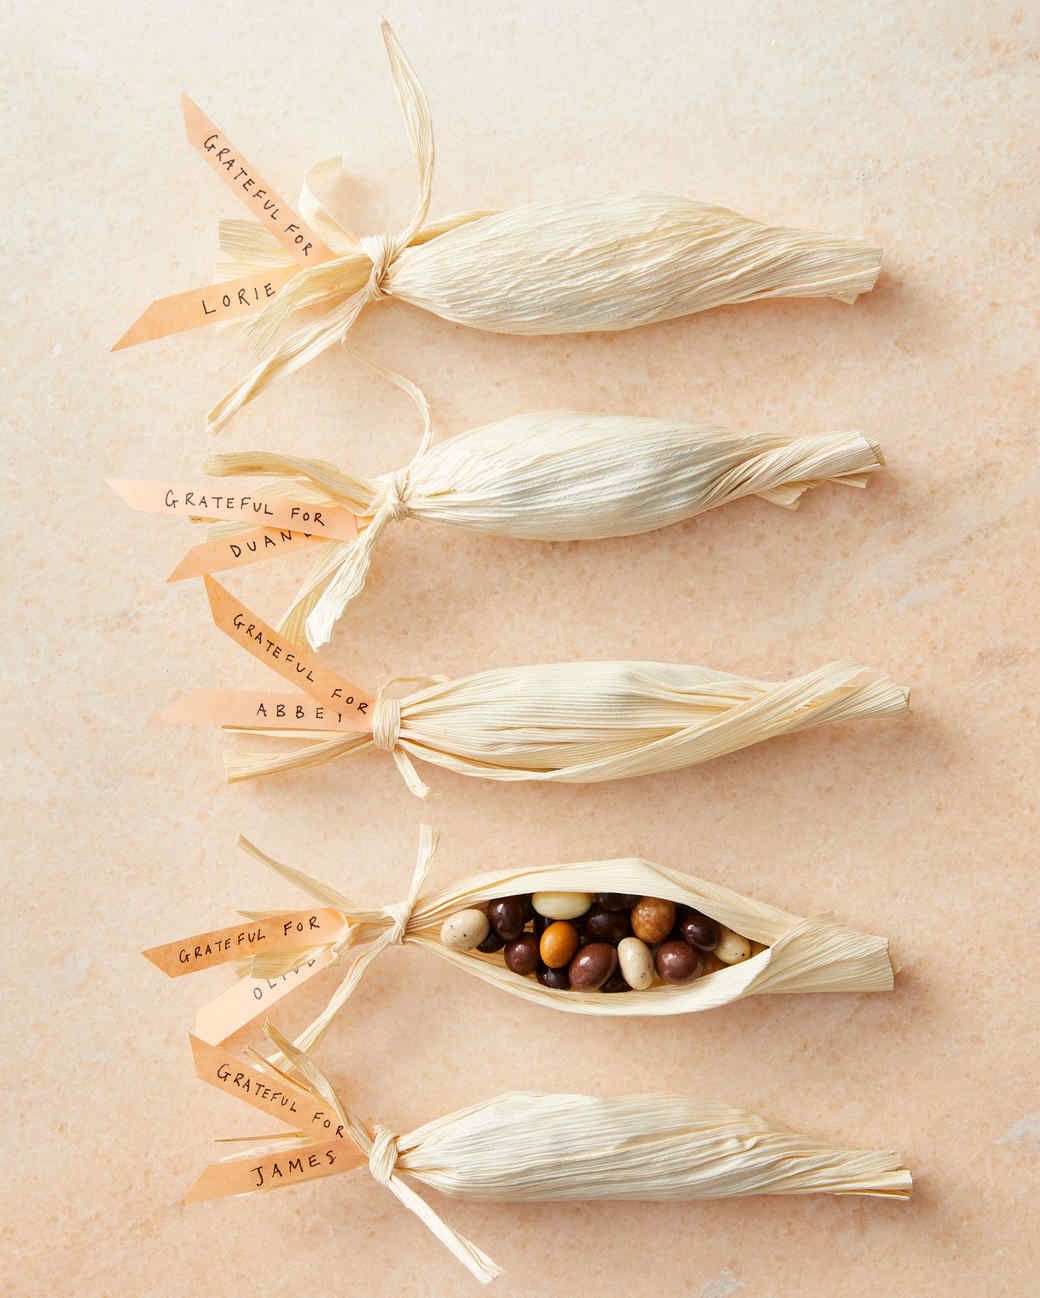 corn husks containing chocolate-covered espresso beans